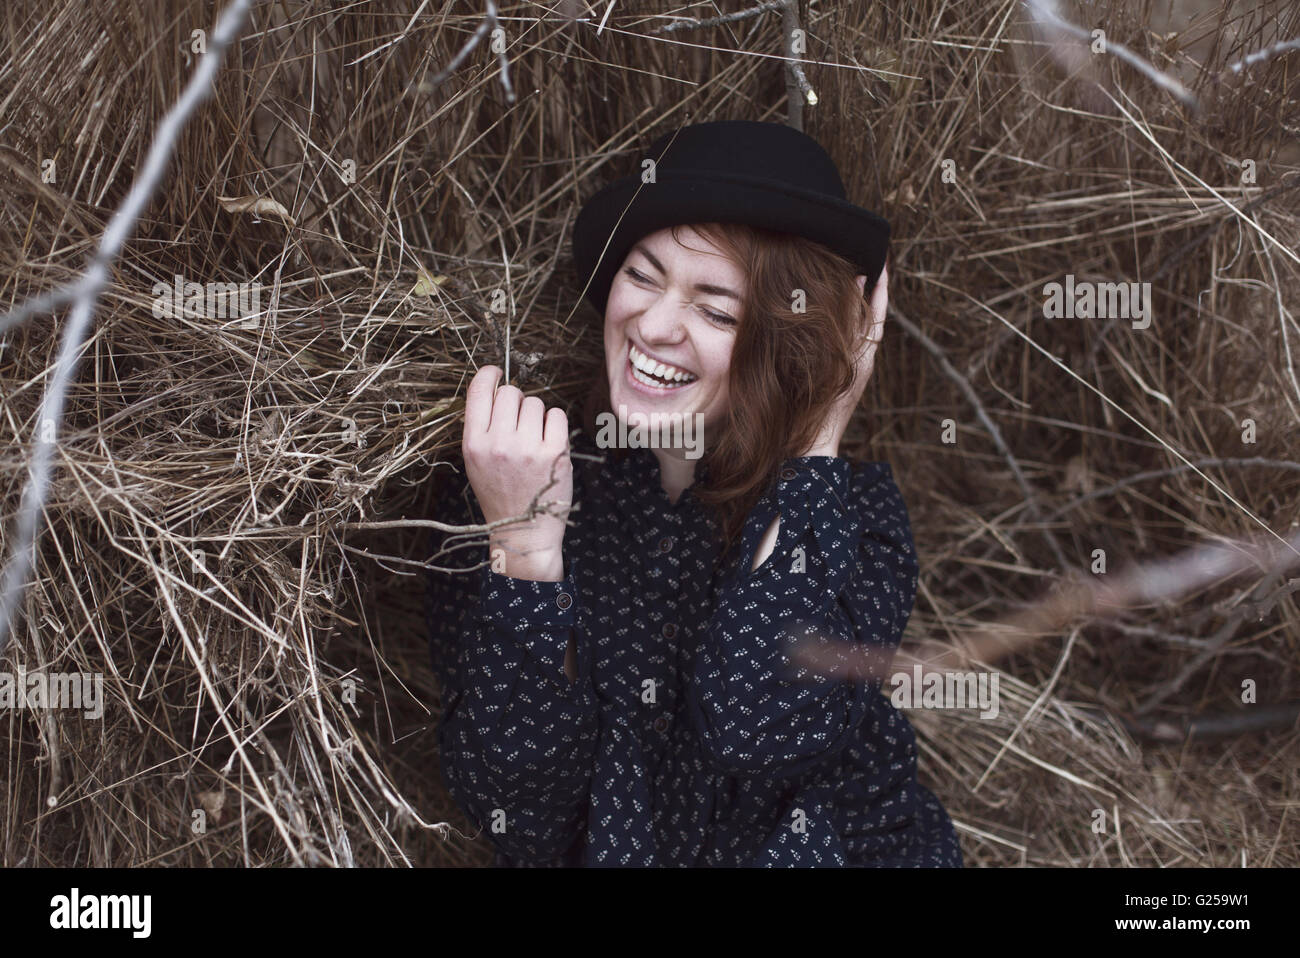 Portrait of a Laughing woman lying in grass Stock Photo